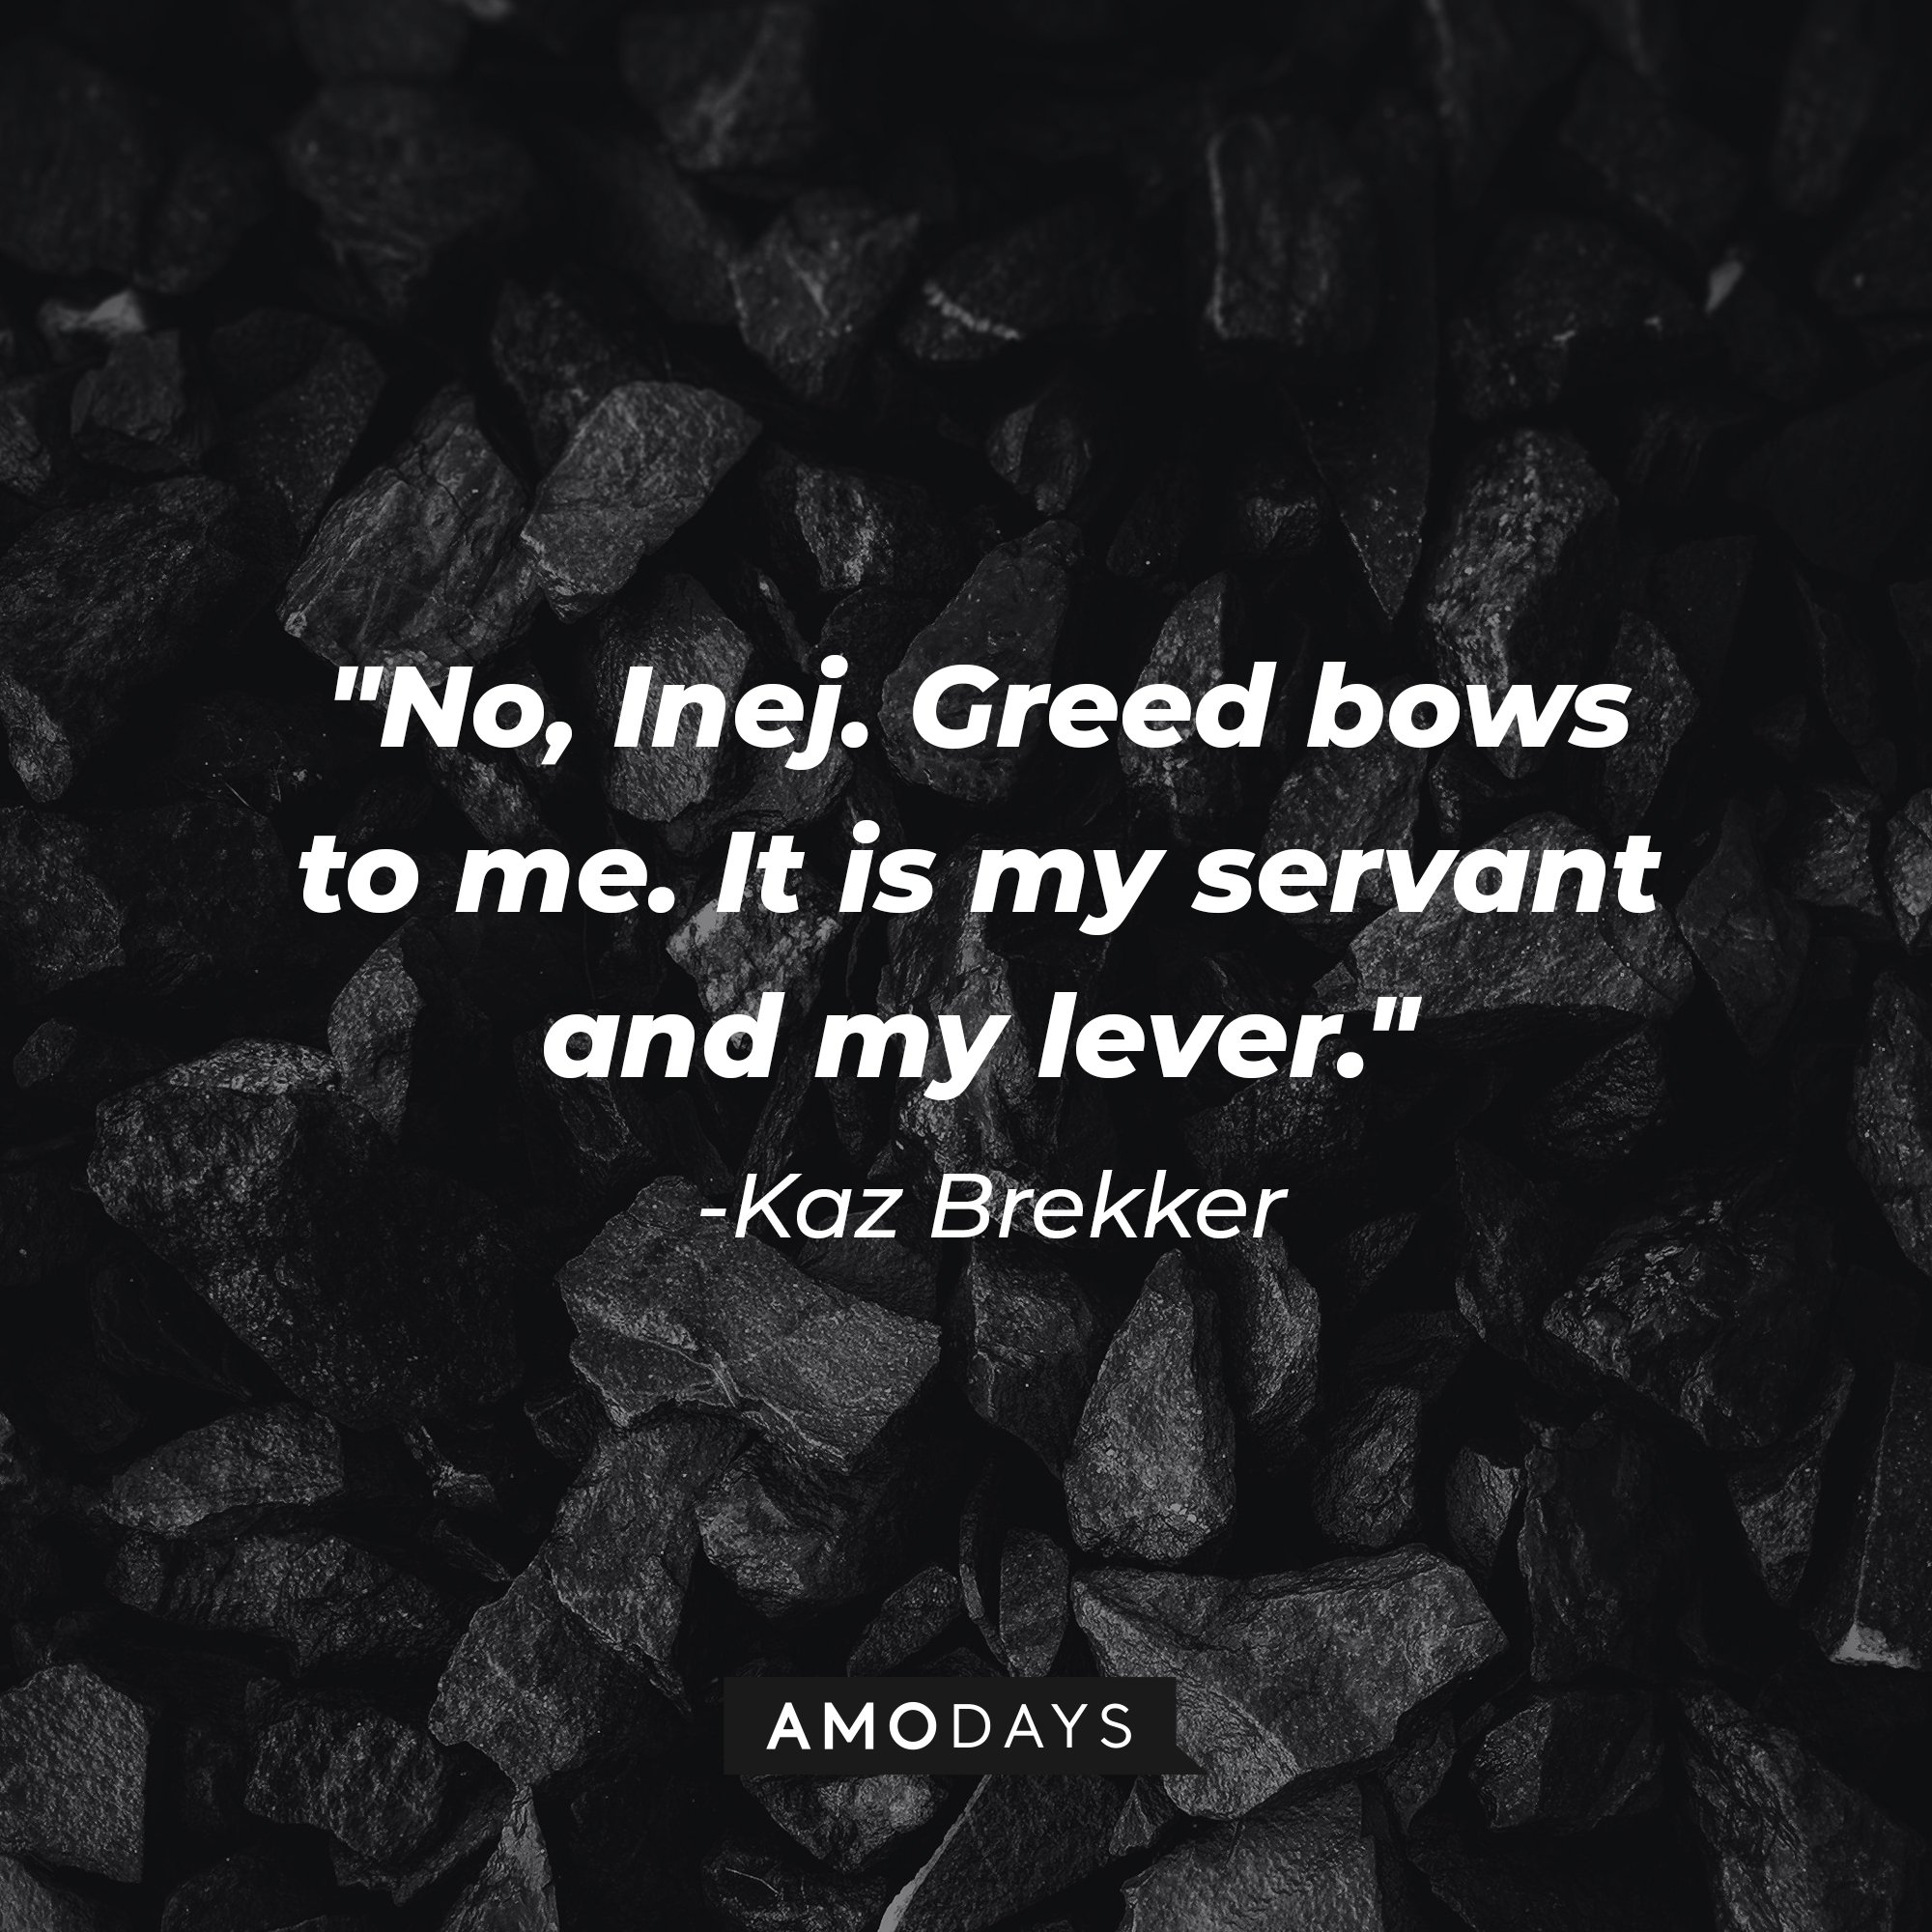 Kaz Brekker’s quote: "No, Inej. Greed bows to me. It is my servant and my lever." | Image: AmoDays